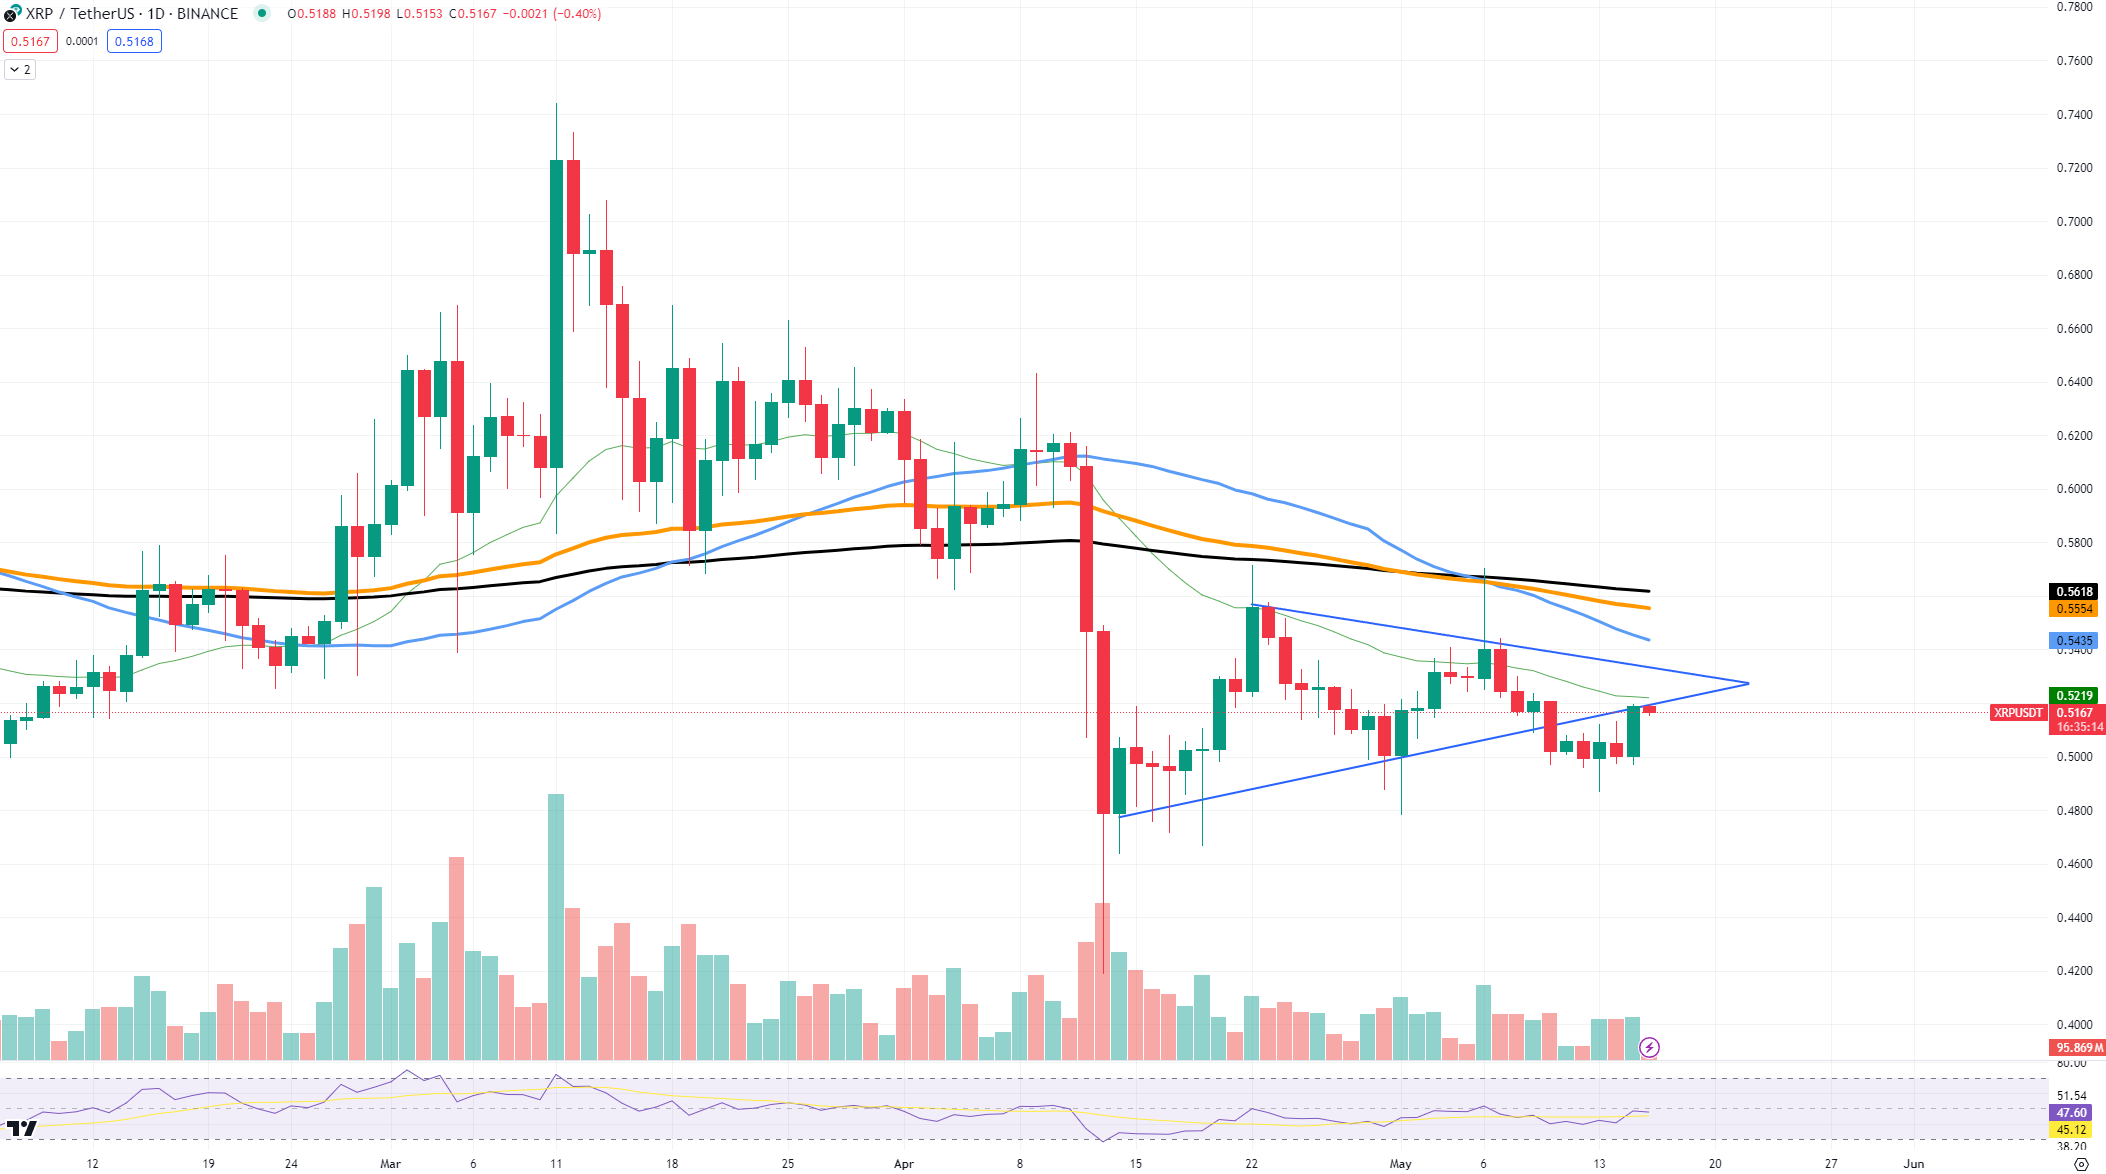 XRP/Tether Chart. Source TradingView